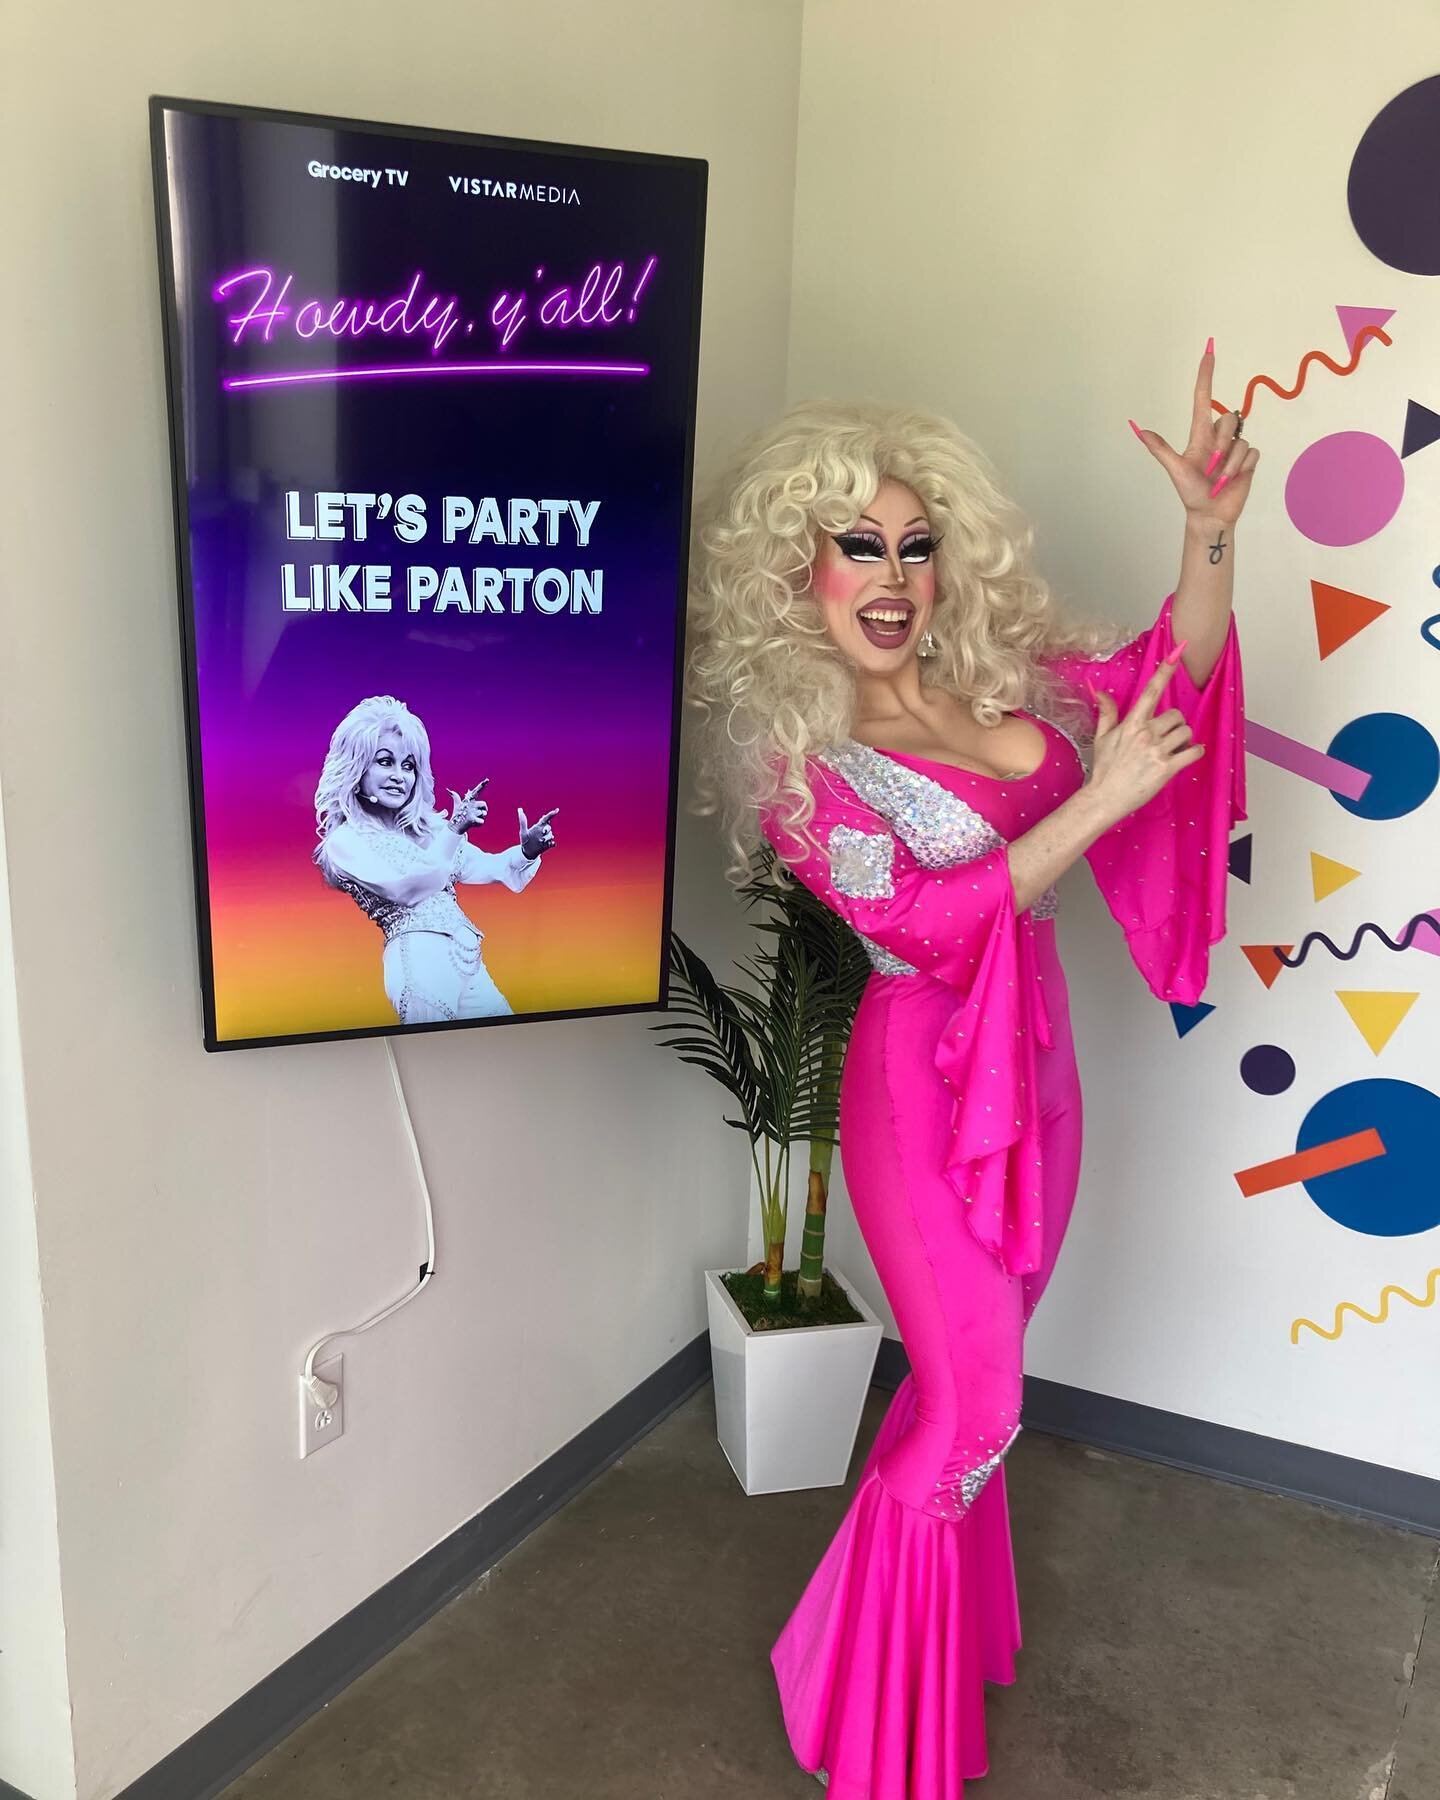 SXSW brings so many cute and creative gigs! We love going next level with event innovators and bringing the ⭐️ EXTRA ⭐️
⠀⠀⠀⠀⠀⠀⠀⠀⠀
 #extragrams #dragqueenentertainment #dragqueentelegrams #austintx #atx #austinevents #dragtelegrams #austindrag #austin